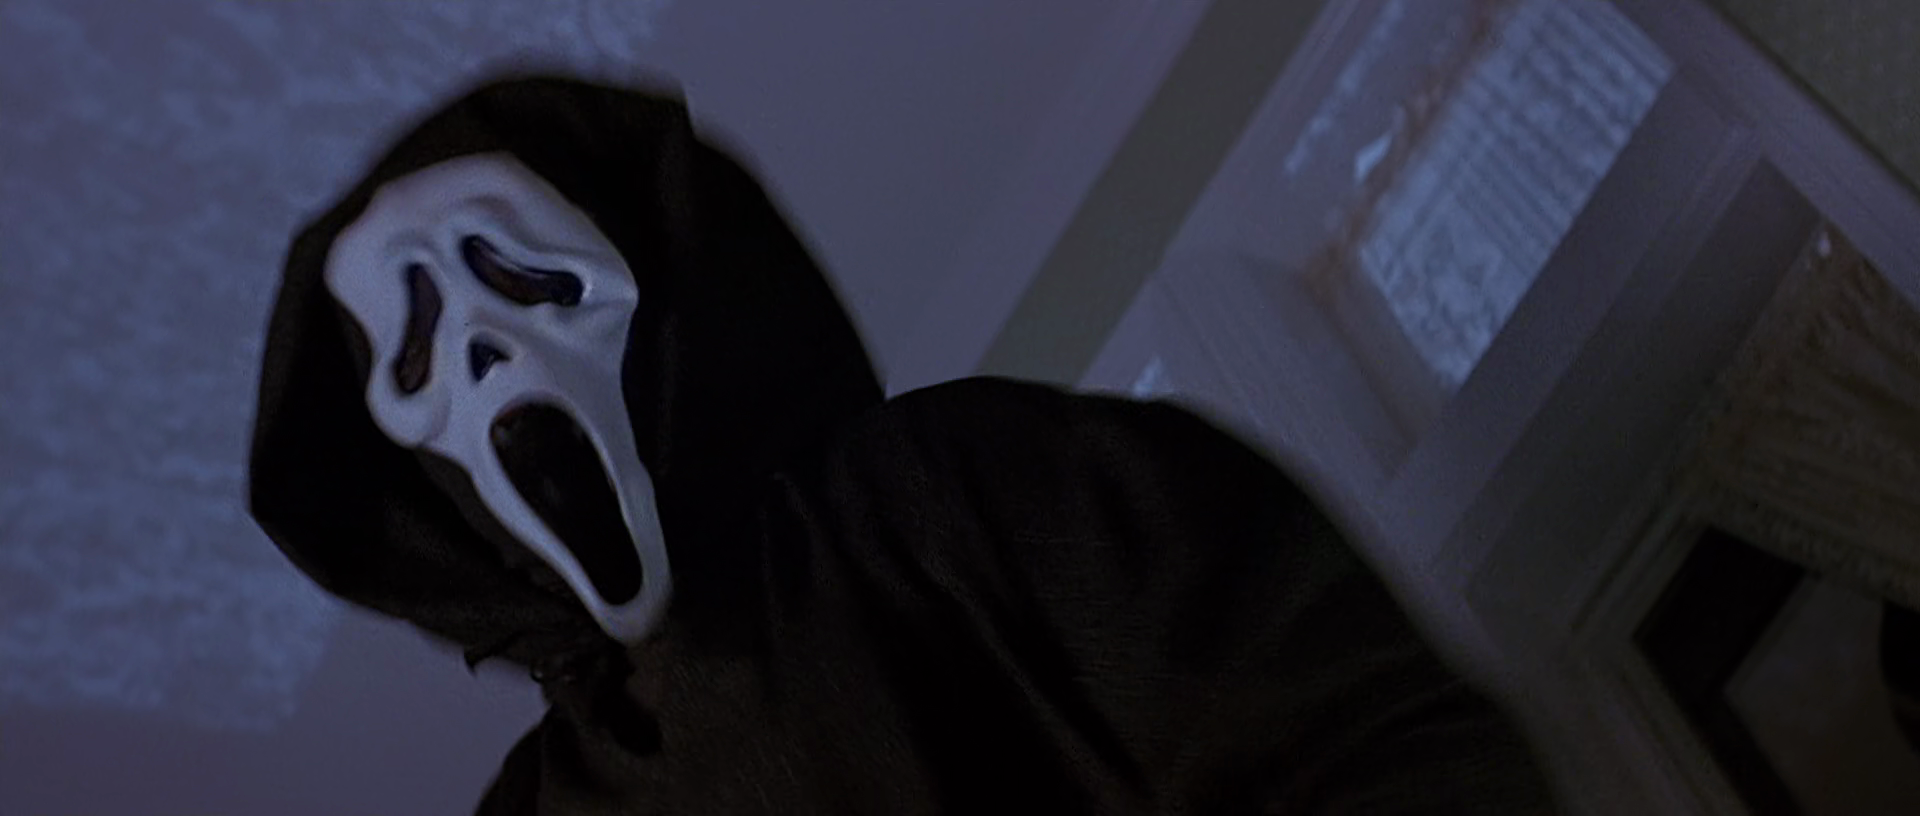 Complete Guide to the Masks Used in Scream (1996)